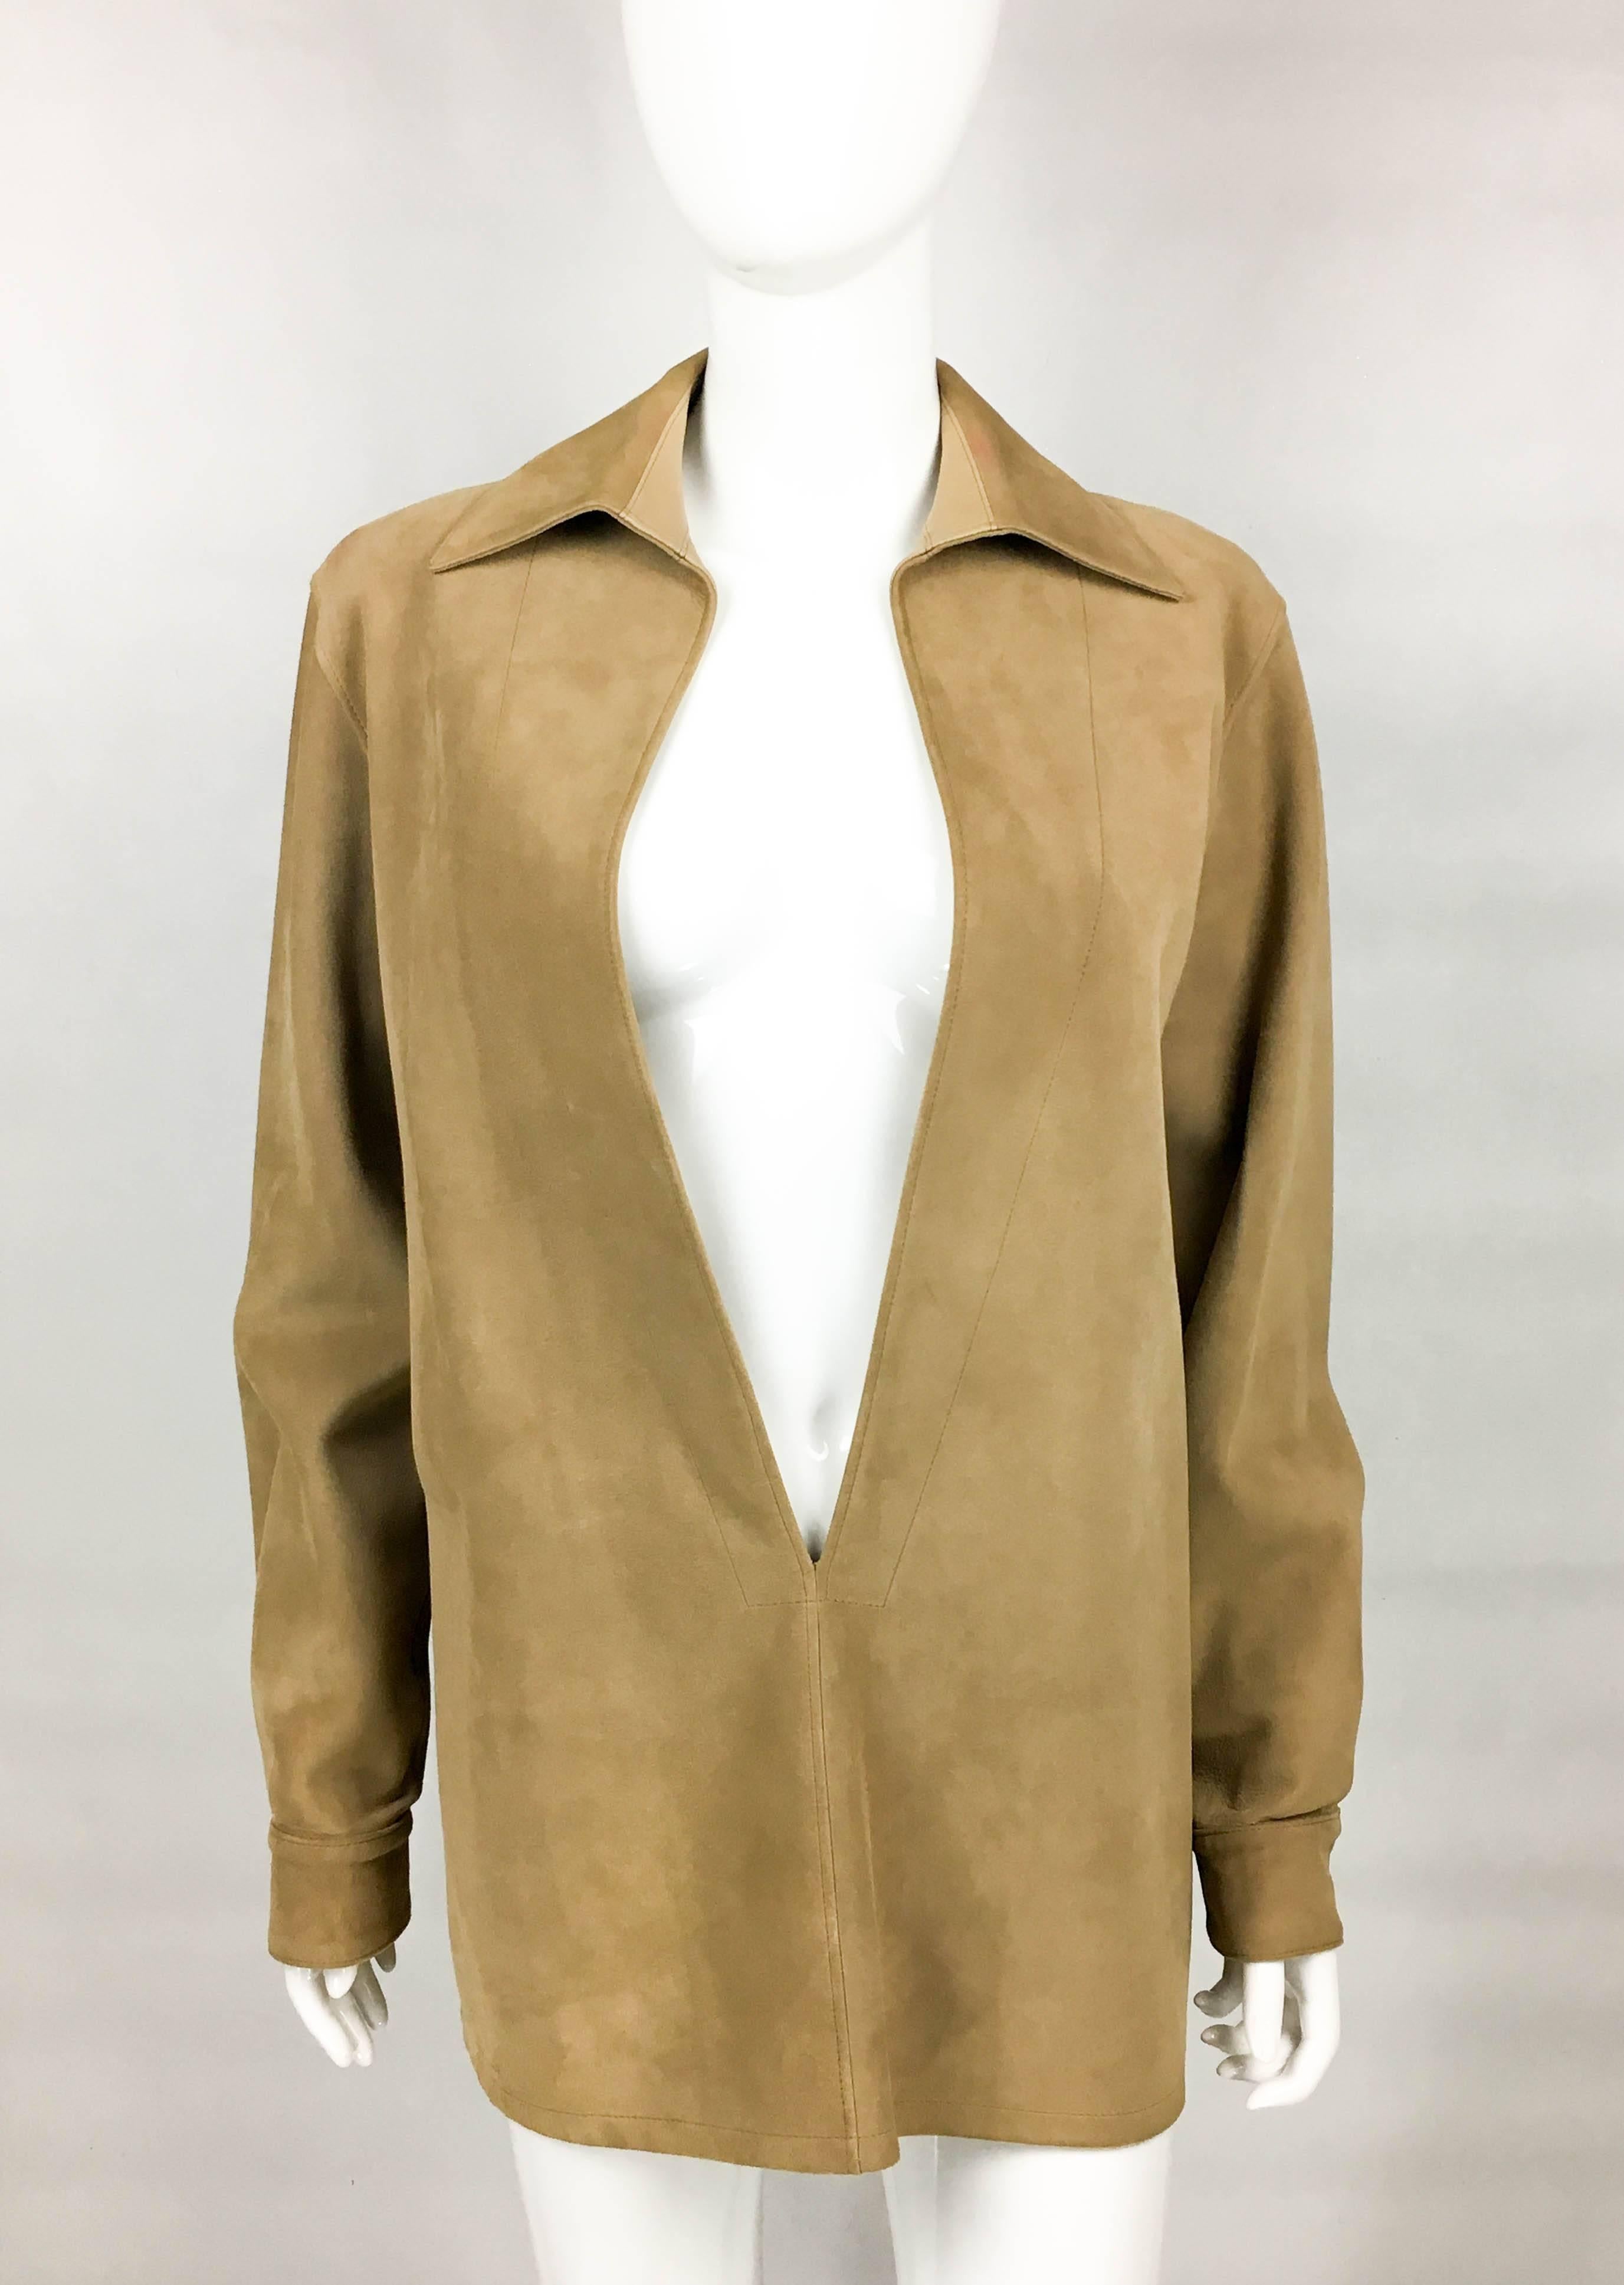 Brown Hermes by Martin Margiela Tan Suede Tunic, 1998 